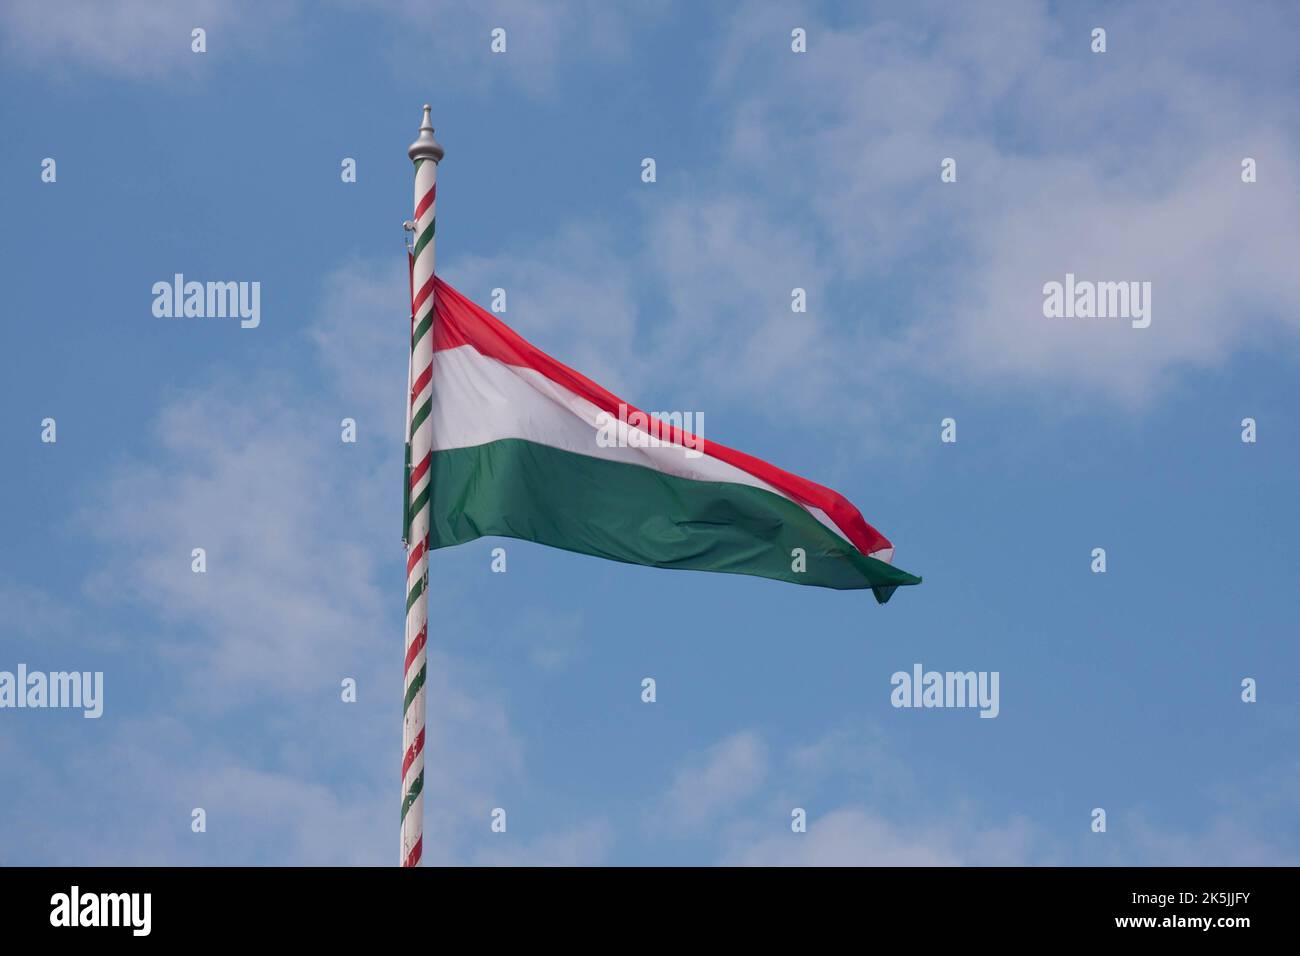 A closeup shot of the flag of Hungary against a background of cloudy blue sky Stock Photo